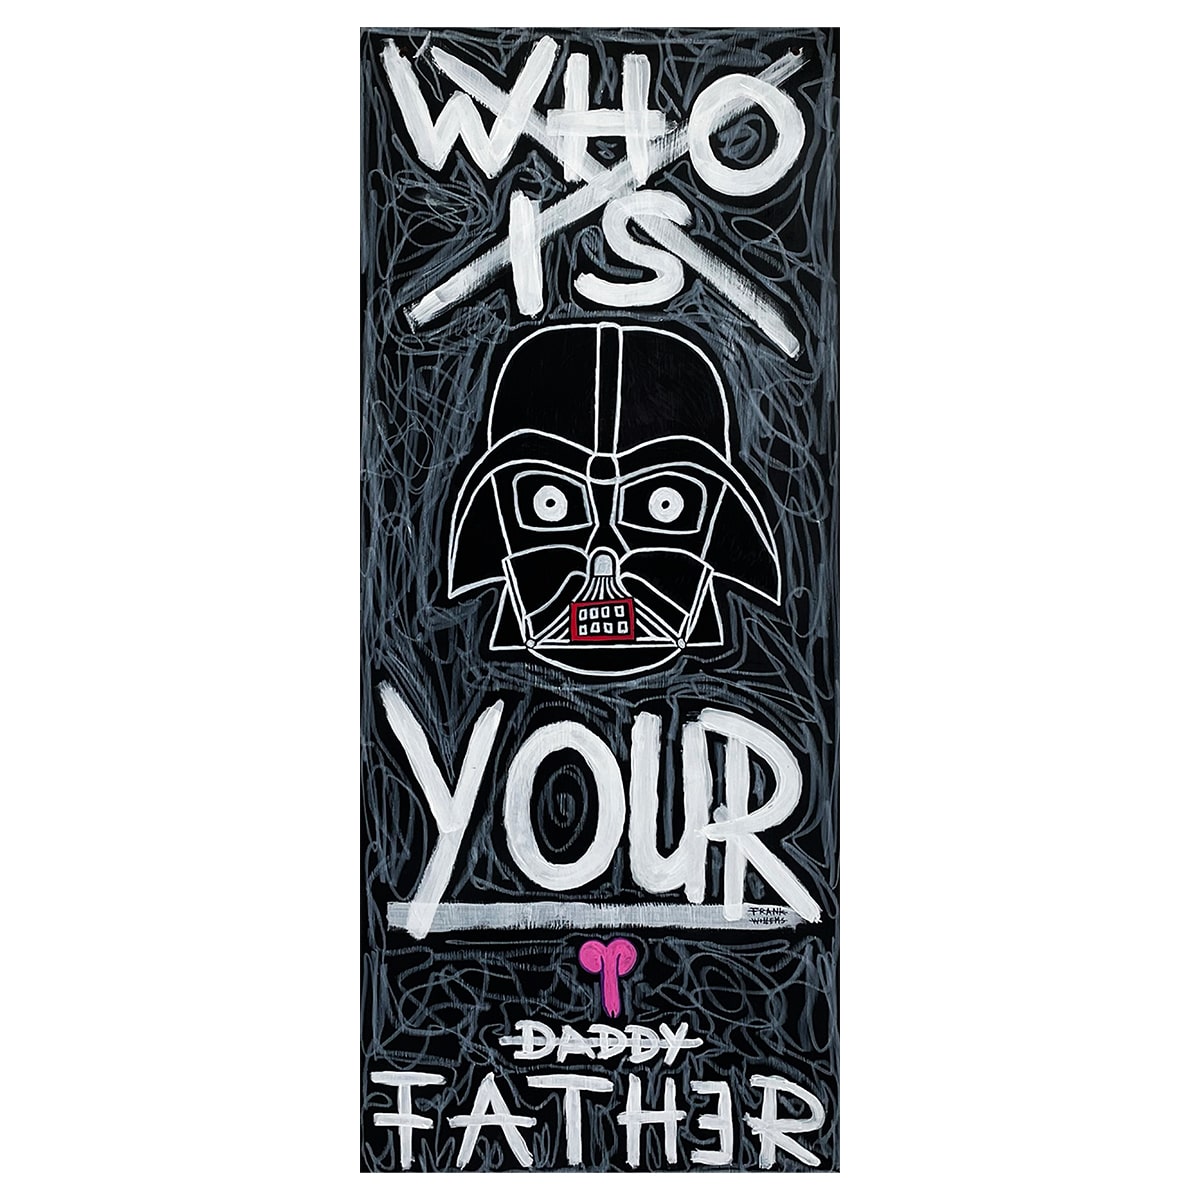 WHO IS YOUR FATHER?